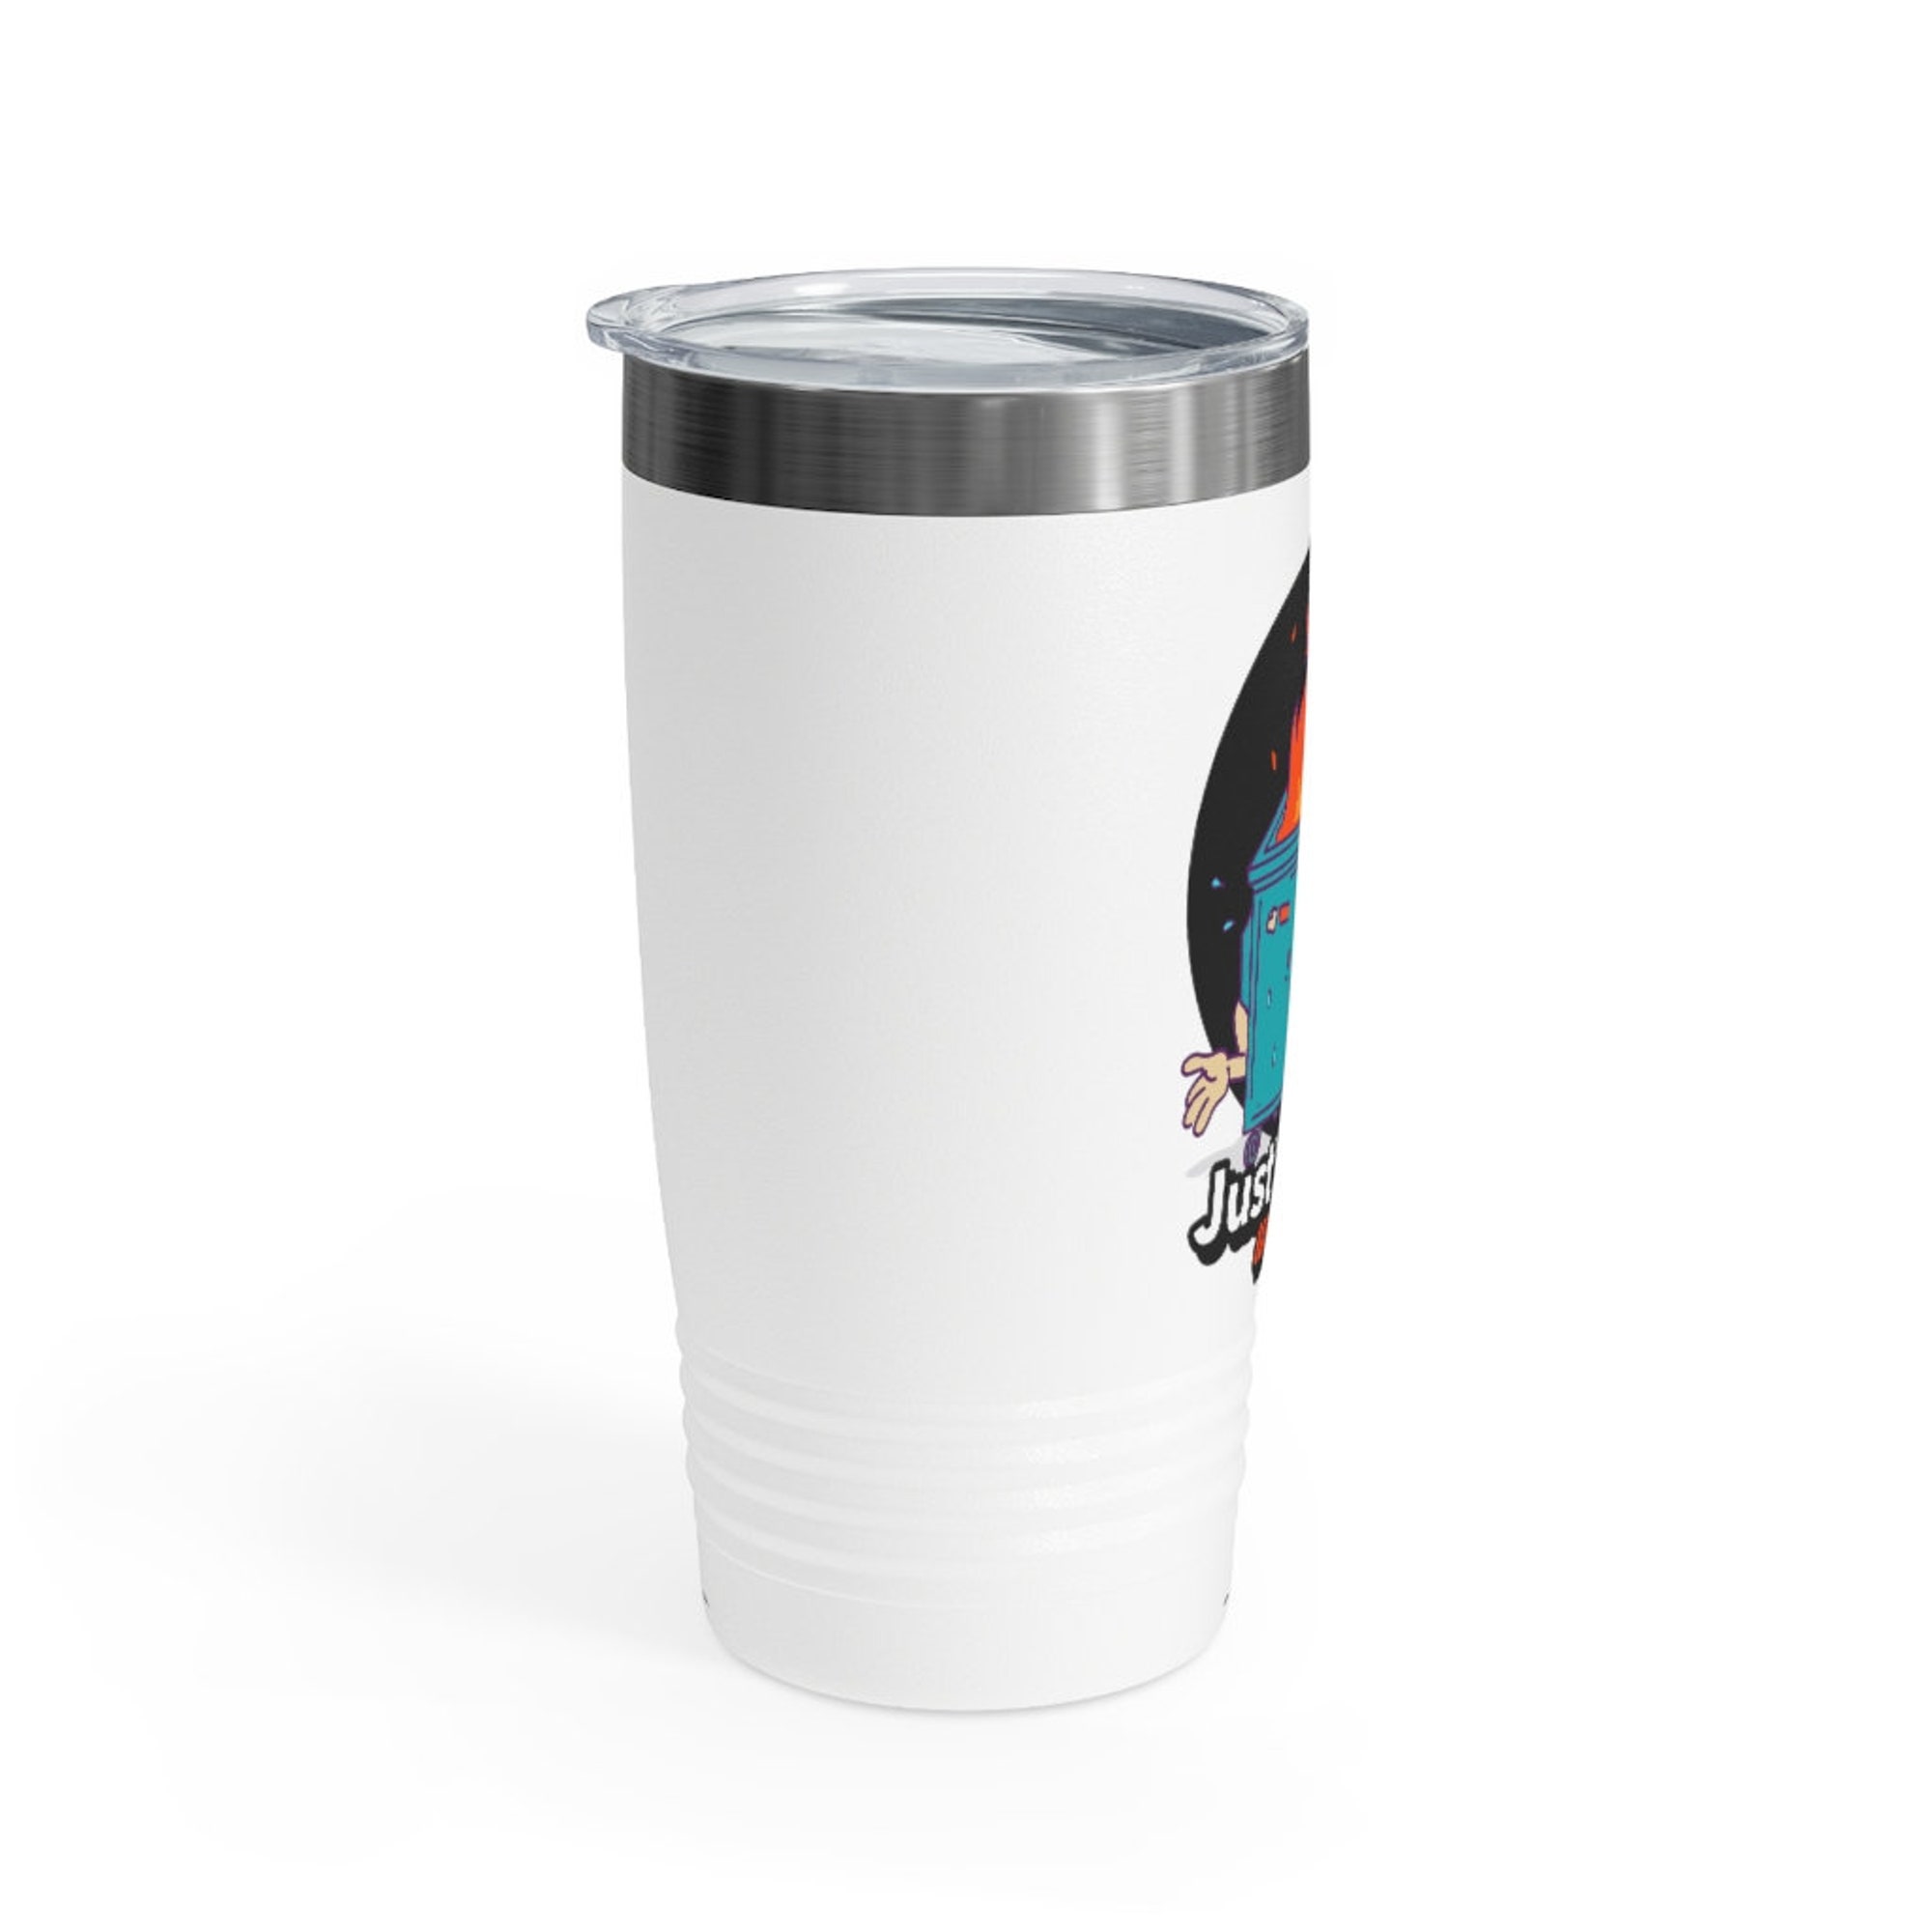 Dumpster fire Just Rollin' with it Ringneck Tumbler, 20oz